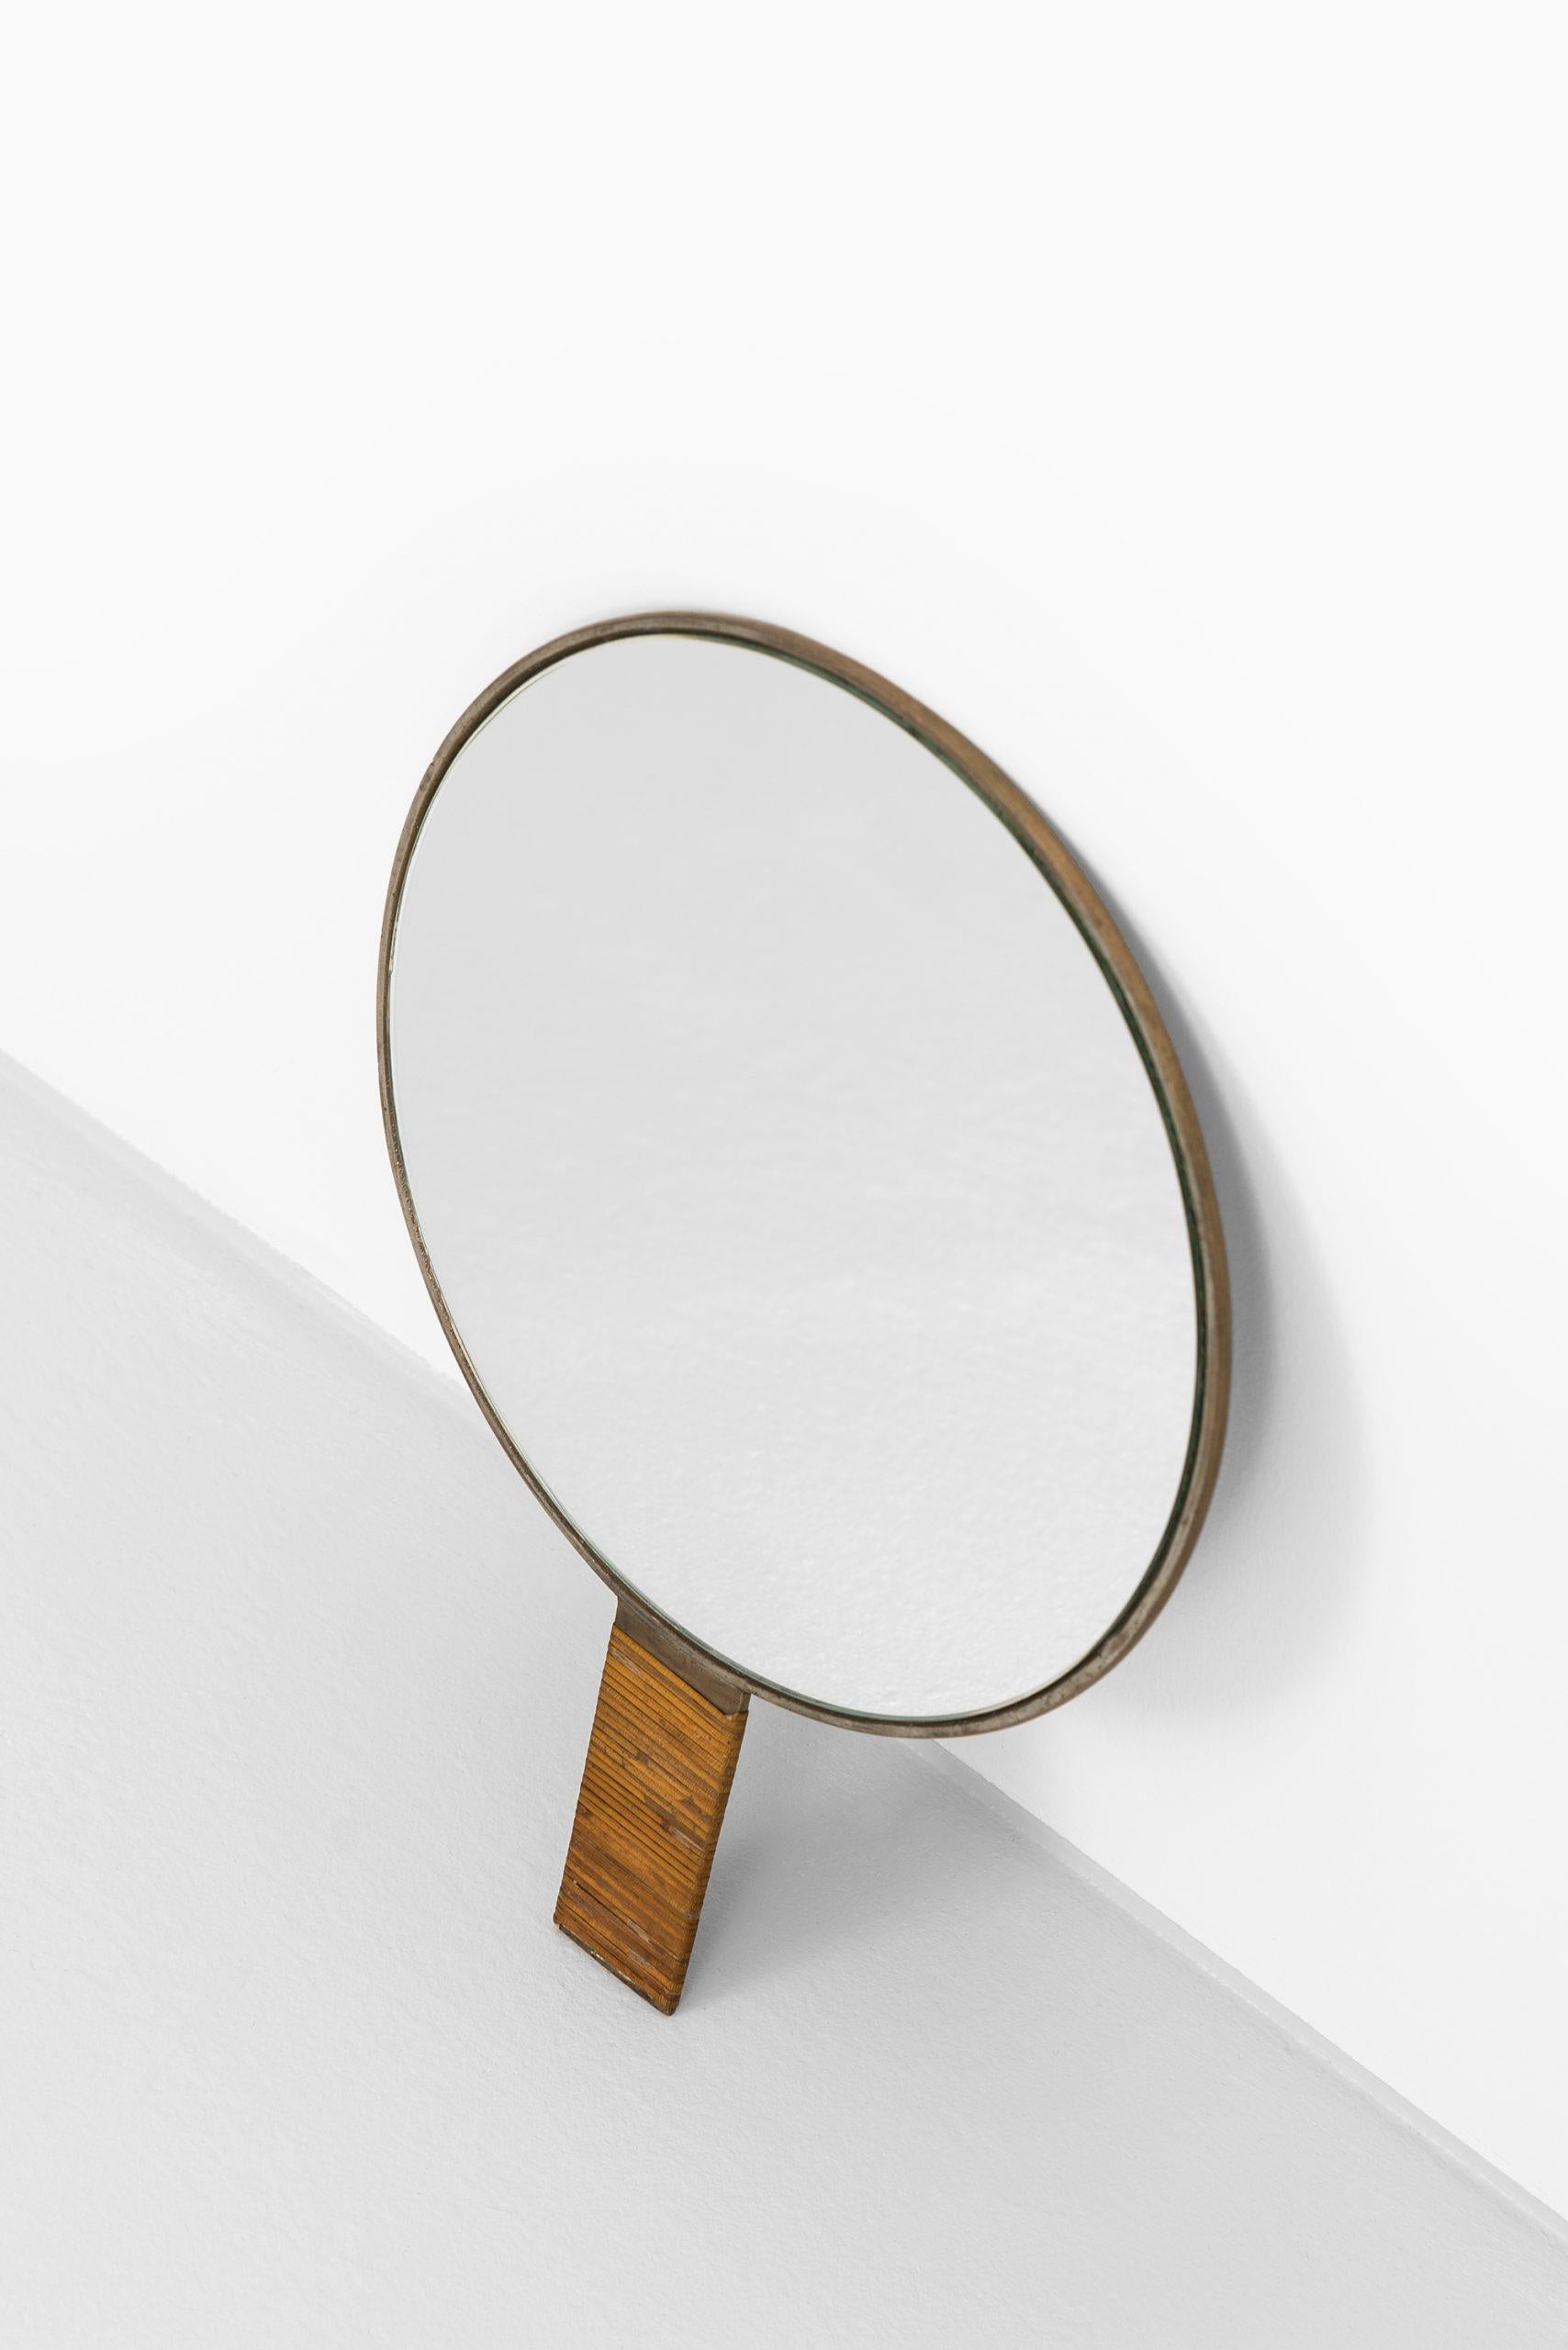 Scandinavian Modern Hand Mirror in the Style of Estric Ericsson Probably Produced in Sweden For Sale